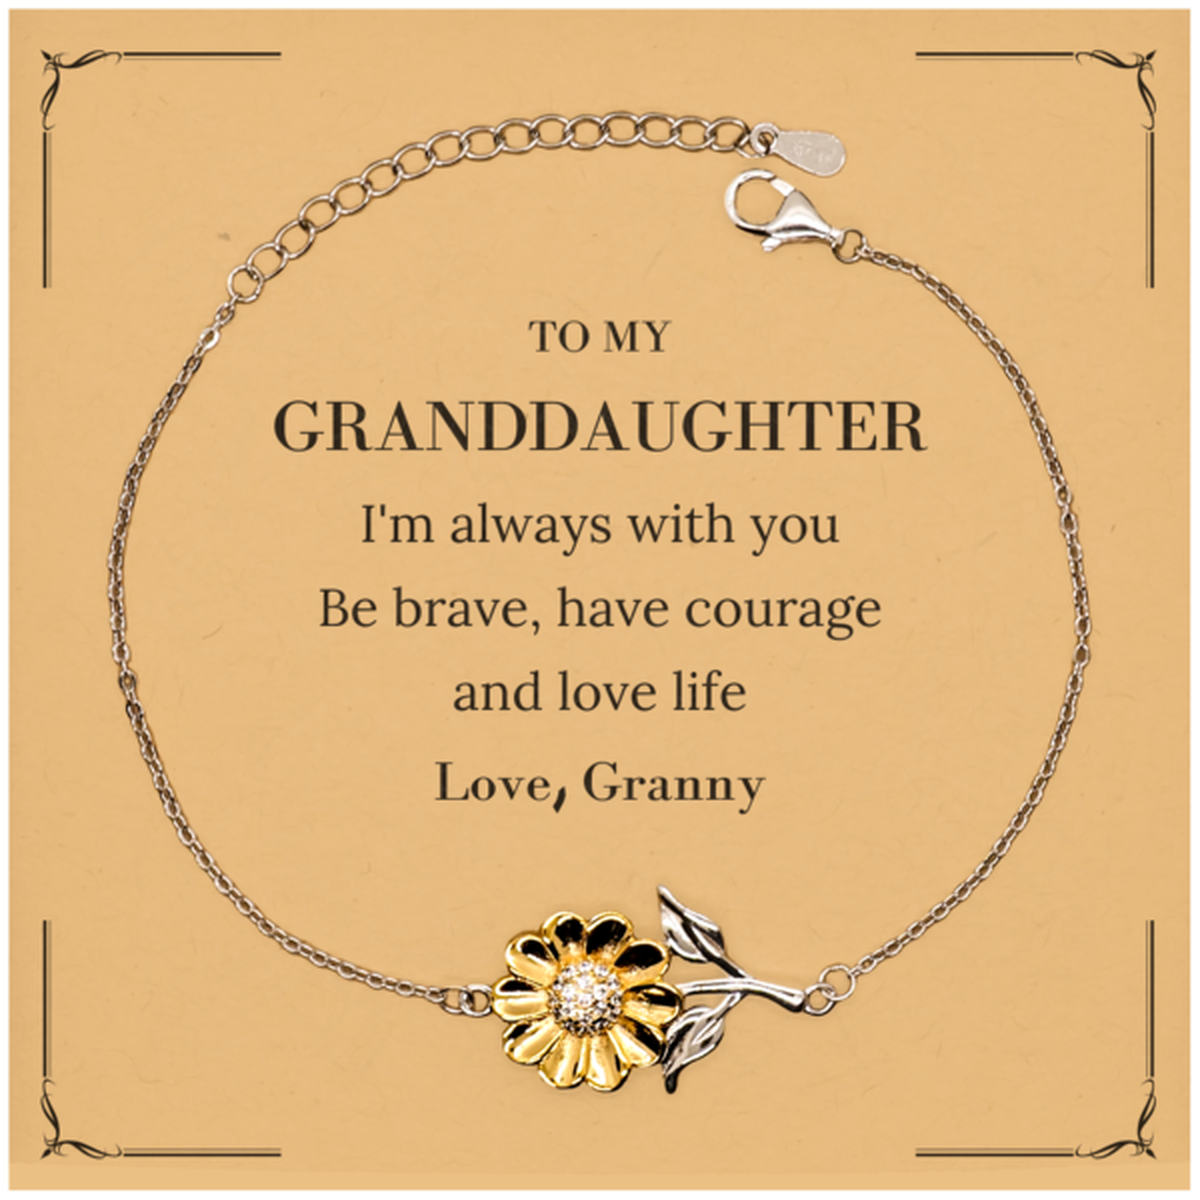 To My Granddaughter Gifts from Granny, Unique Sunflower Bracelet Inspirational Christmas Birthday Graduation Gifts for Granddaughter I'm always with you. Be brave, have courage and love life. Love, Granny